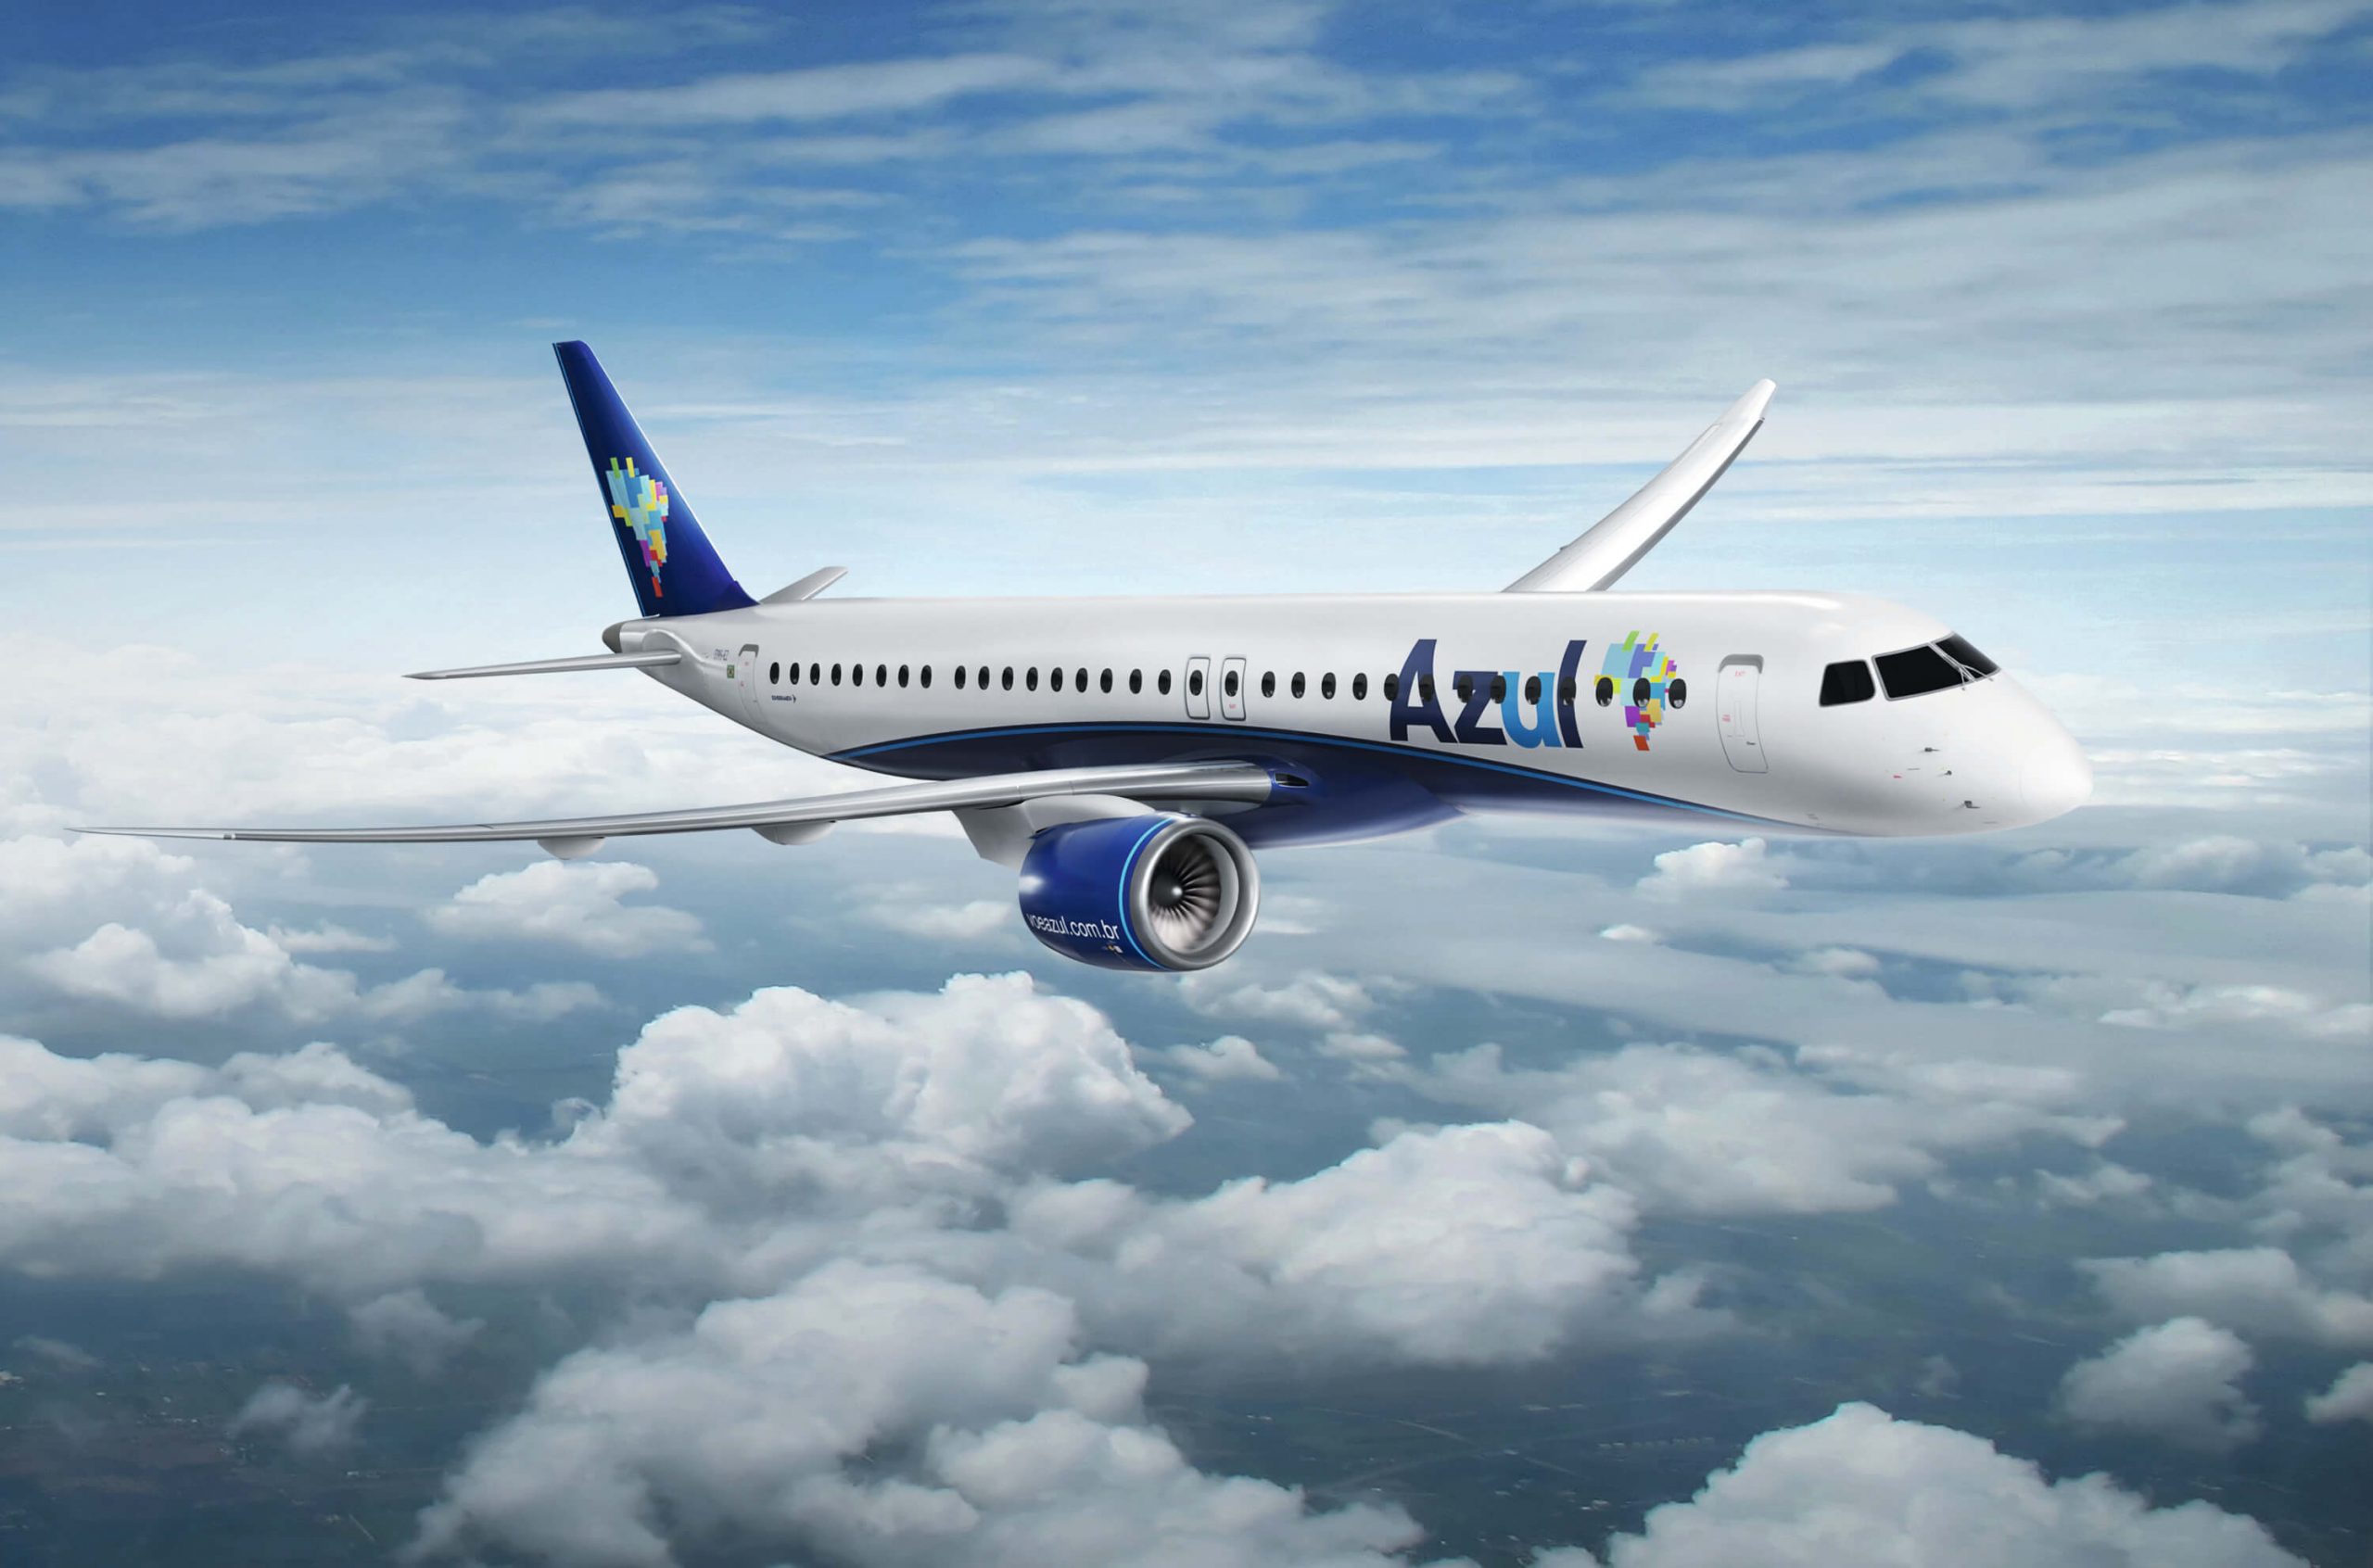 Azul statement on the LATAM codeshare and potential industry consolidation